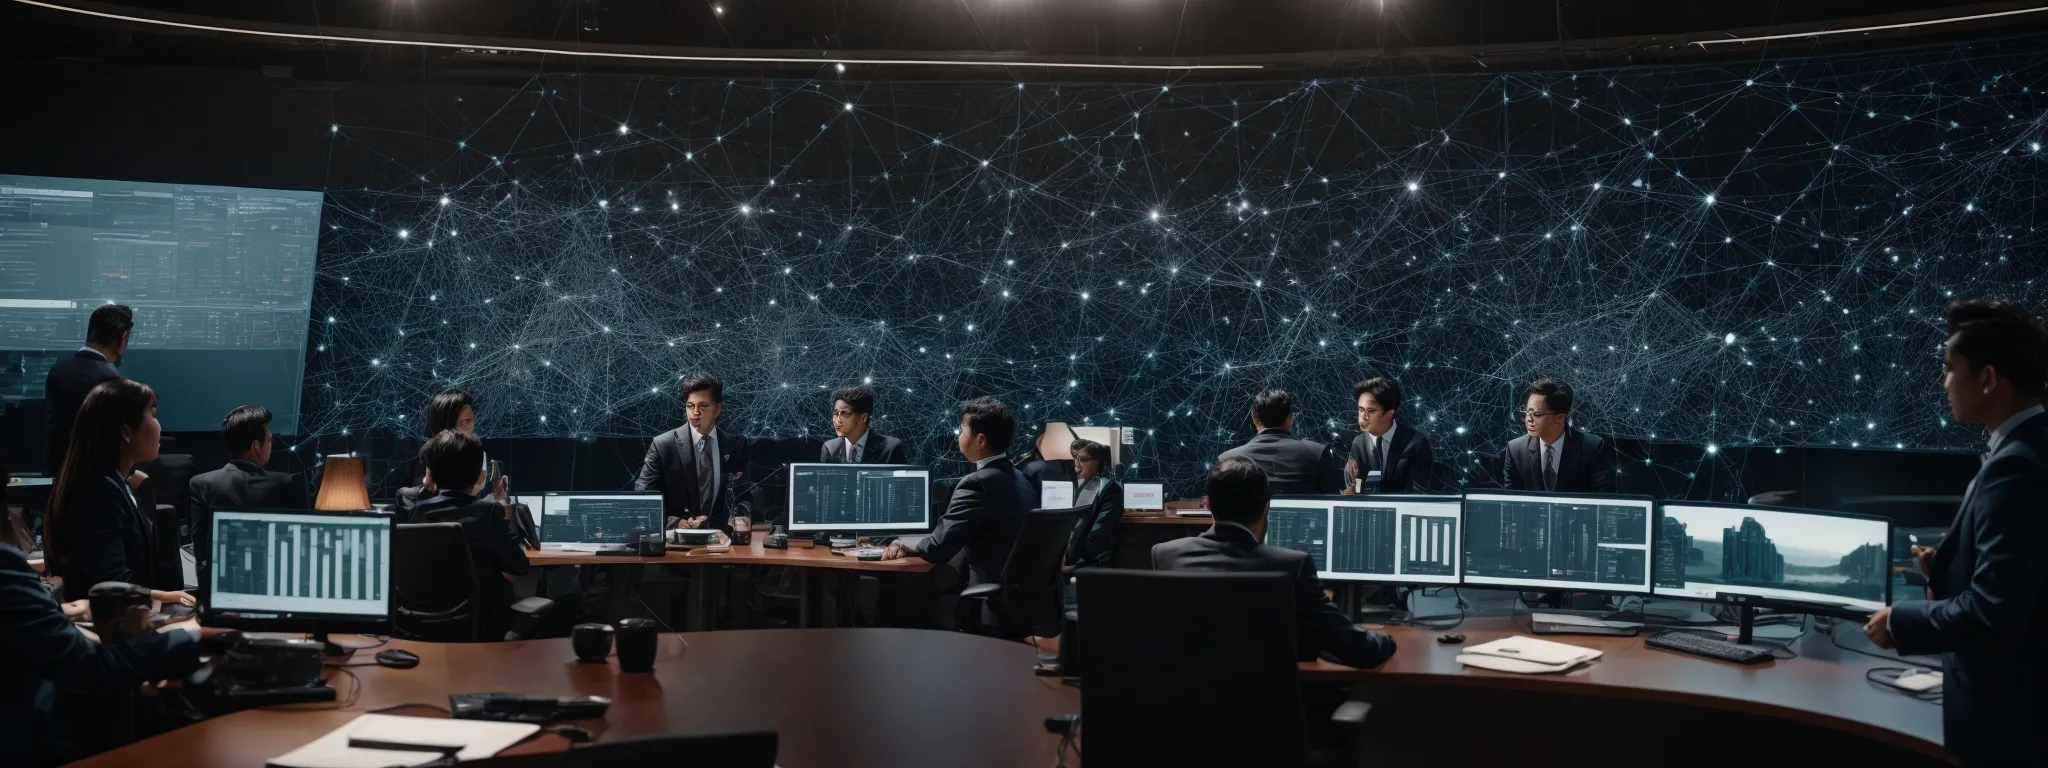 a group of business professionals gathered around a large monitor, analyzing a complex web of interconnected nodes representing a sophisticated seo strategy.